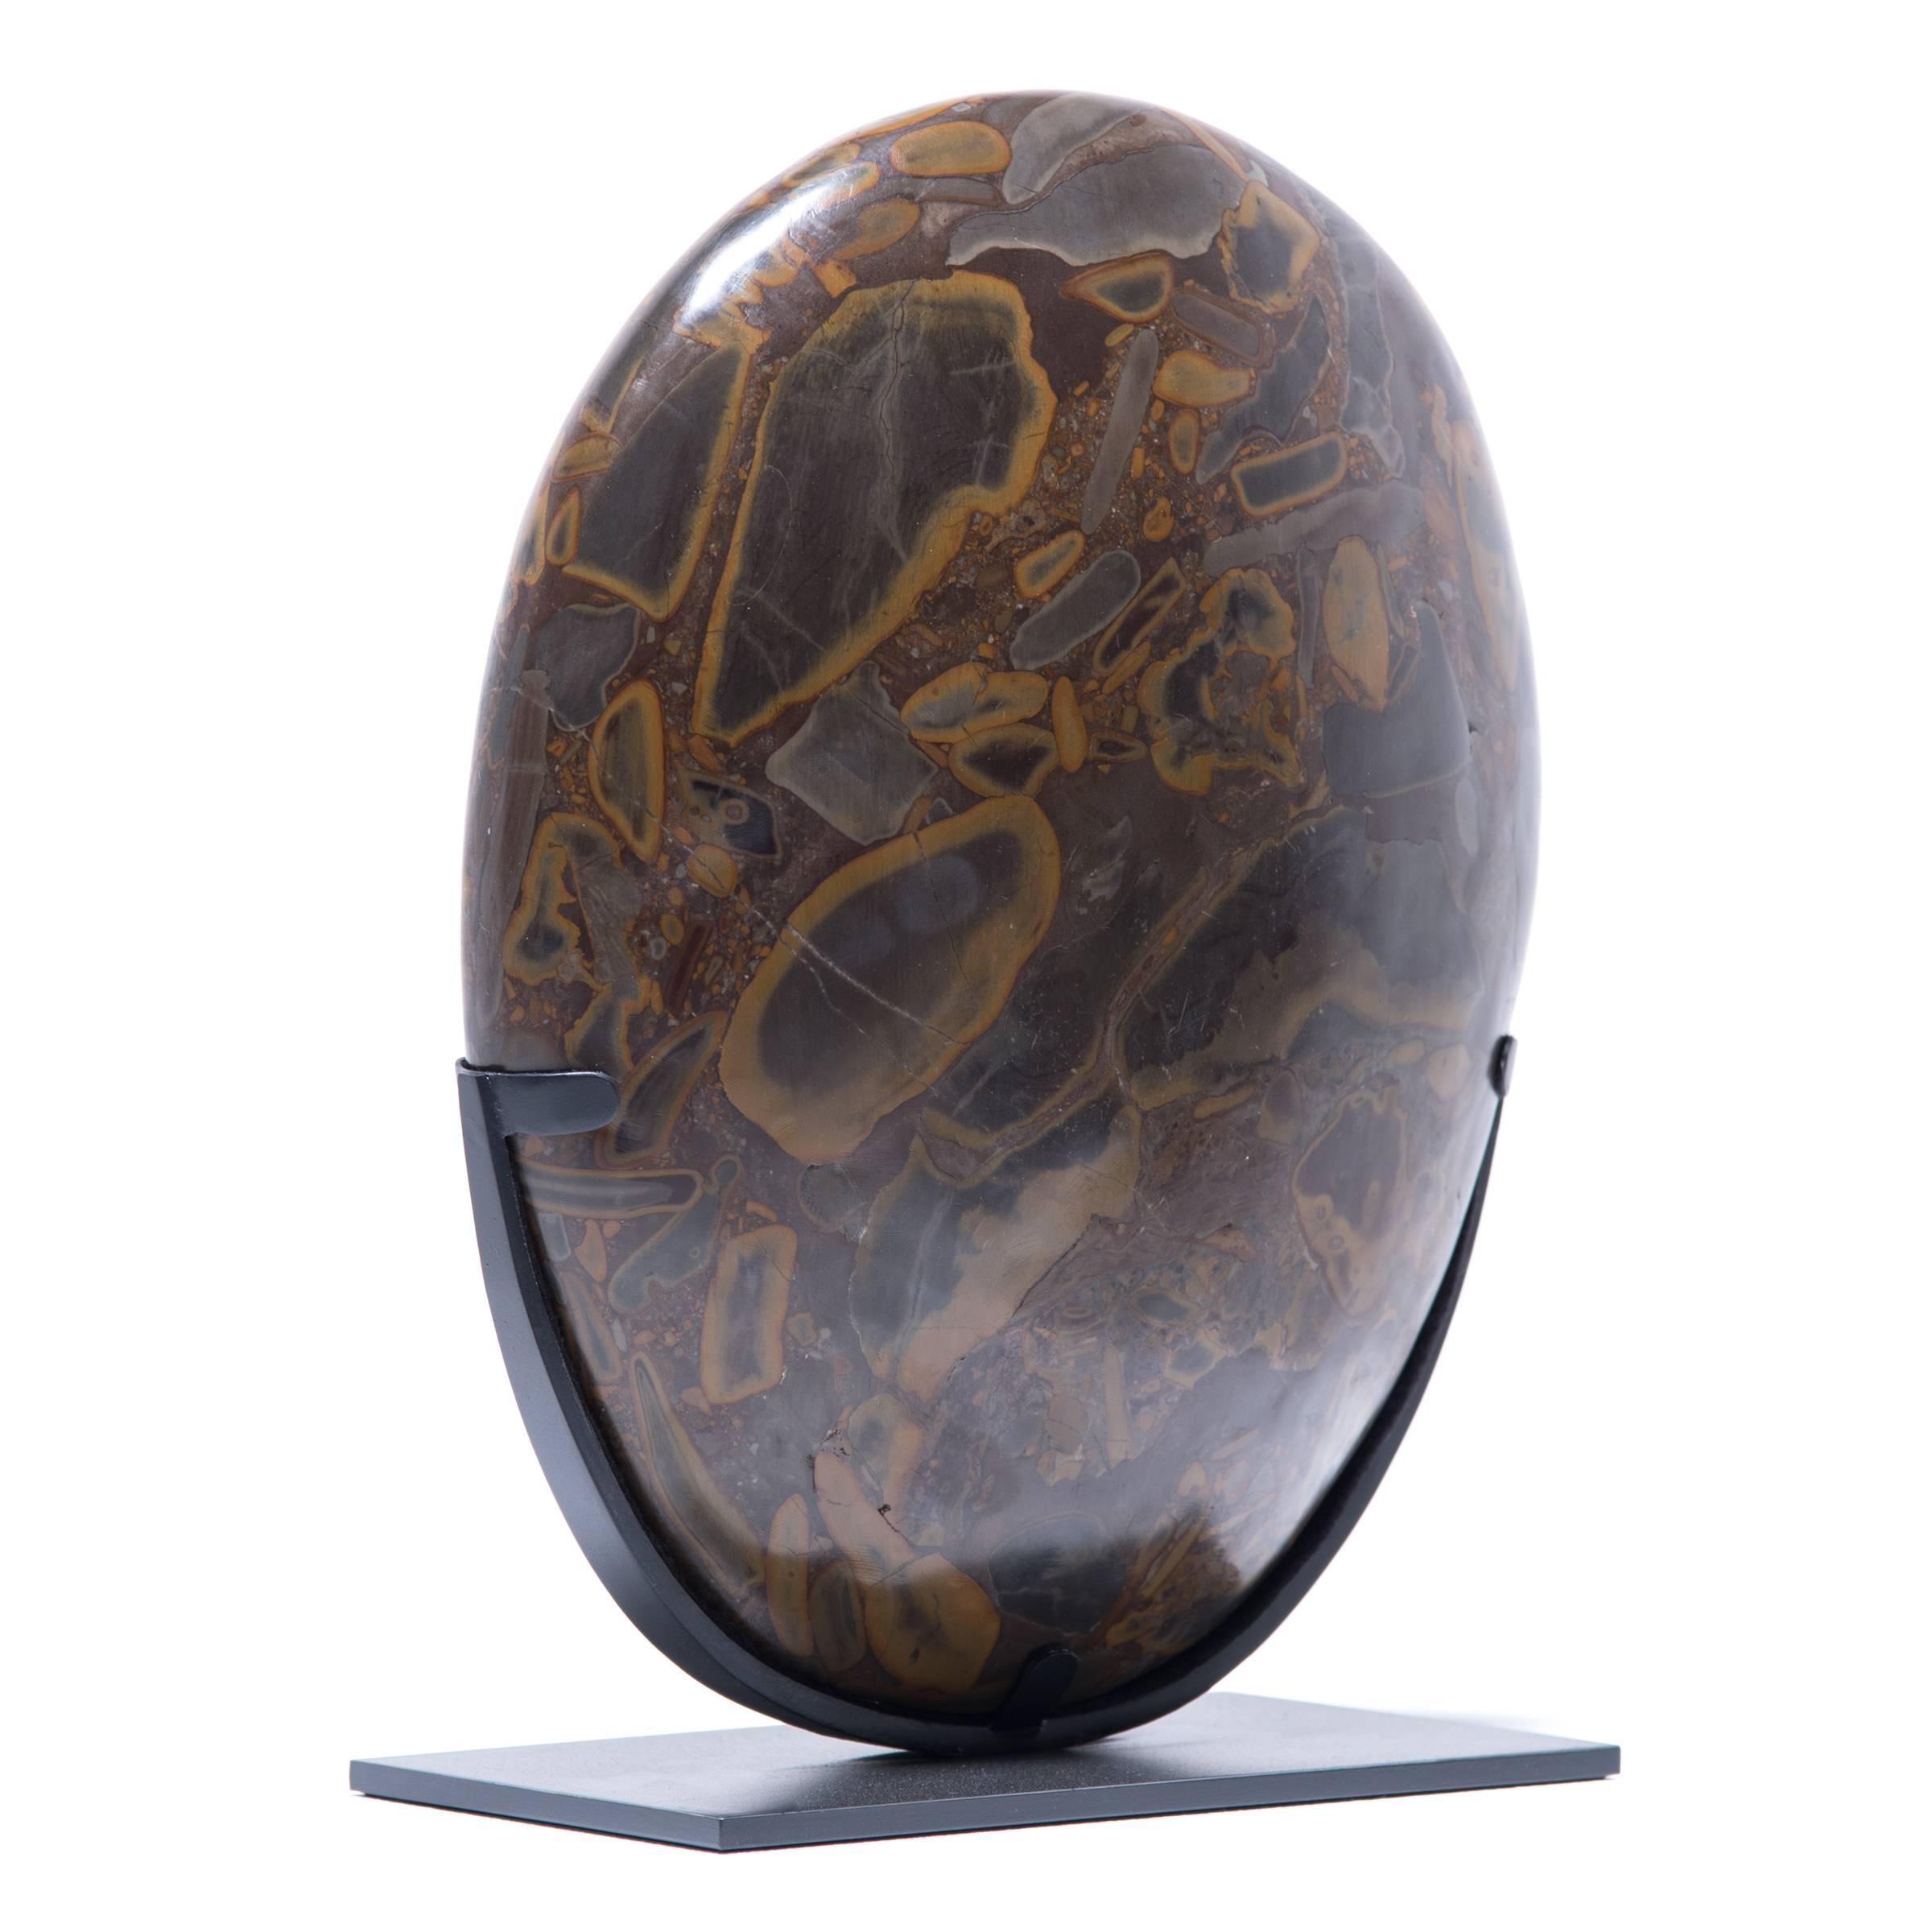 Puddingstone is named for its unique composite nature, suspending numerous multicolored pebbles that resemble raisins in a pudding. Historically, it has been favored by artists and calligraphers as an ideal surface on which to place scrolls for